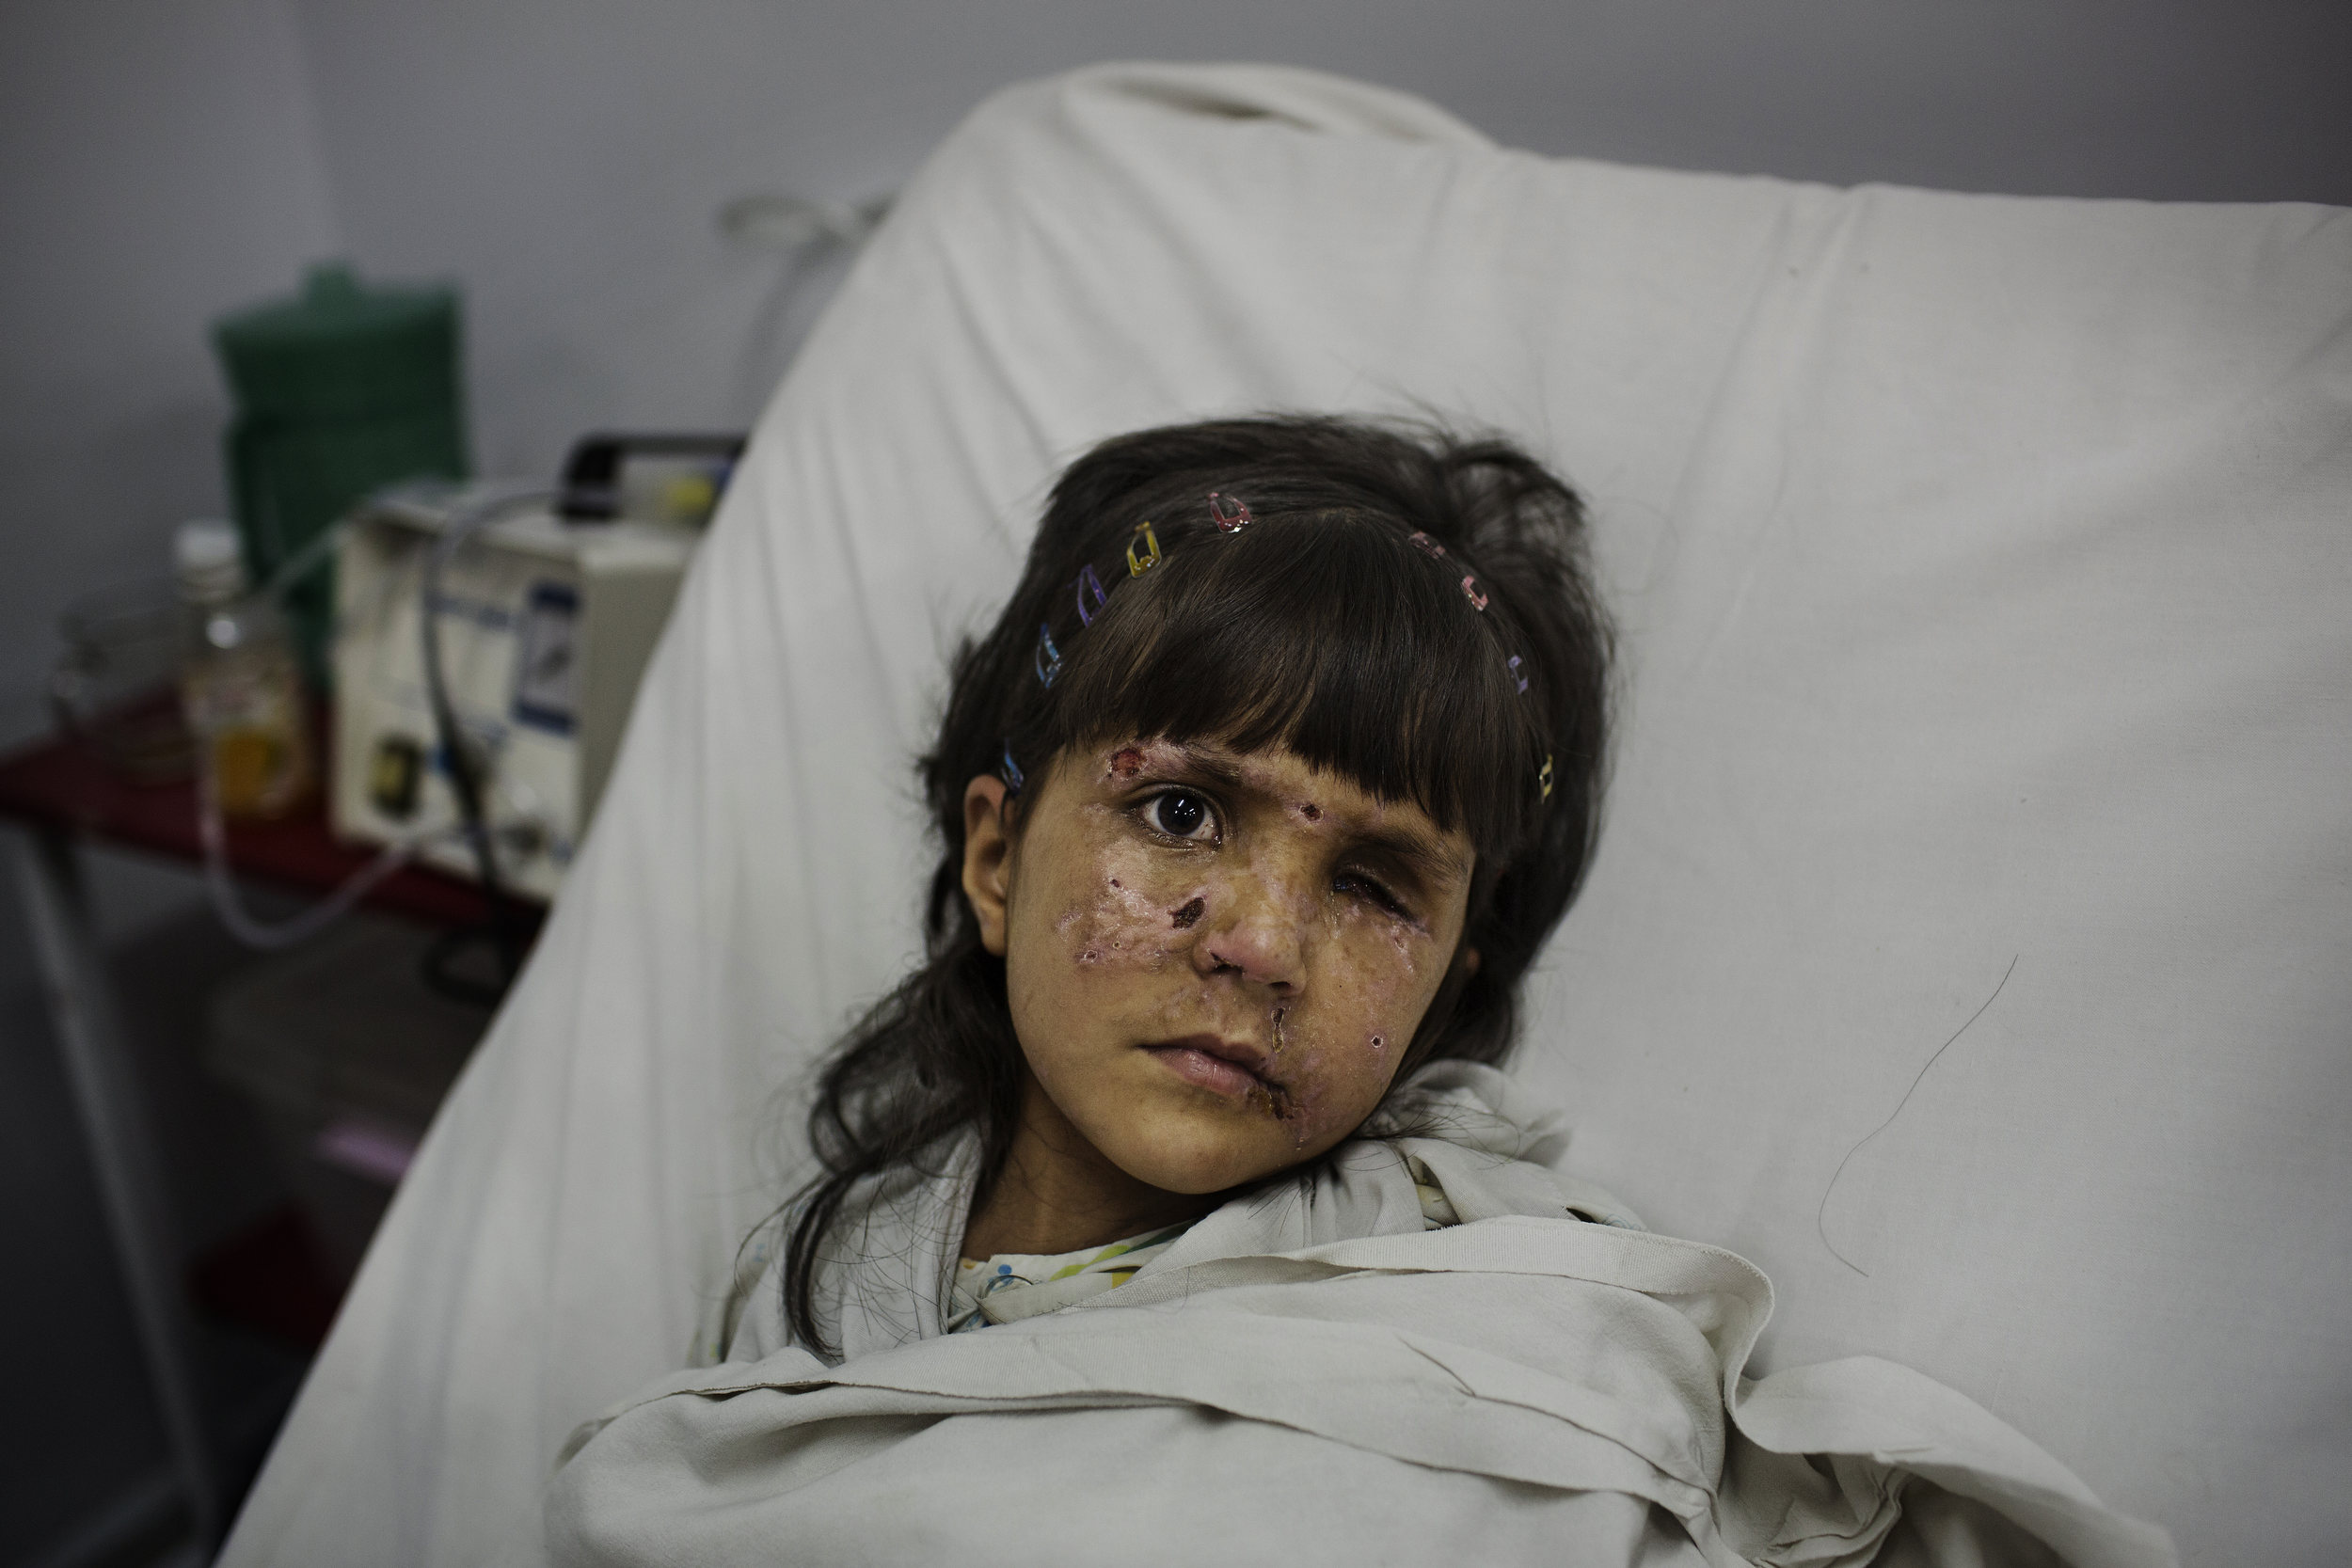  Maneza, 5, from Gardez, recovers from a mine explosion that cost her hand and right eye. 